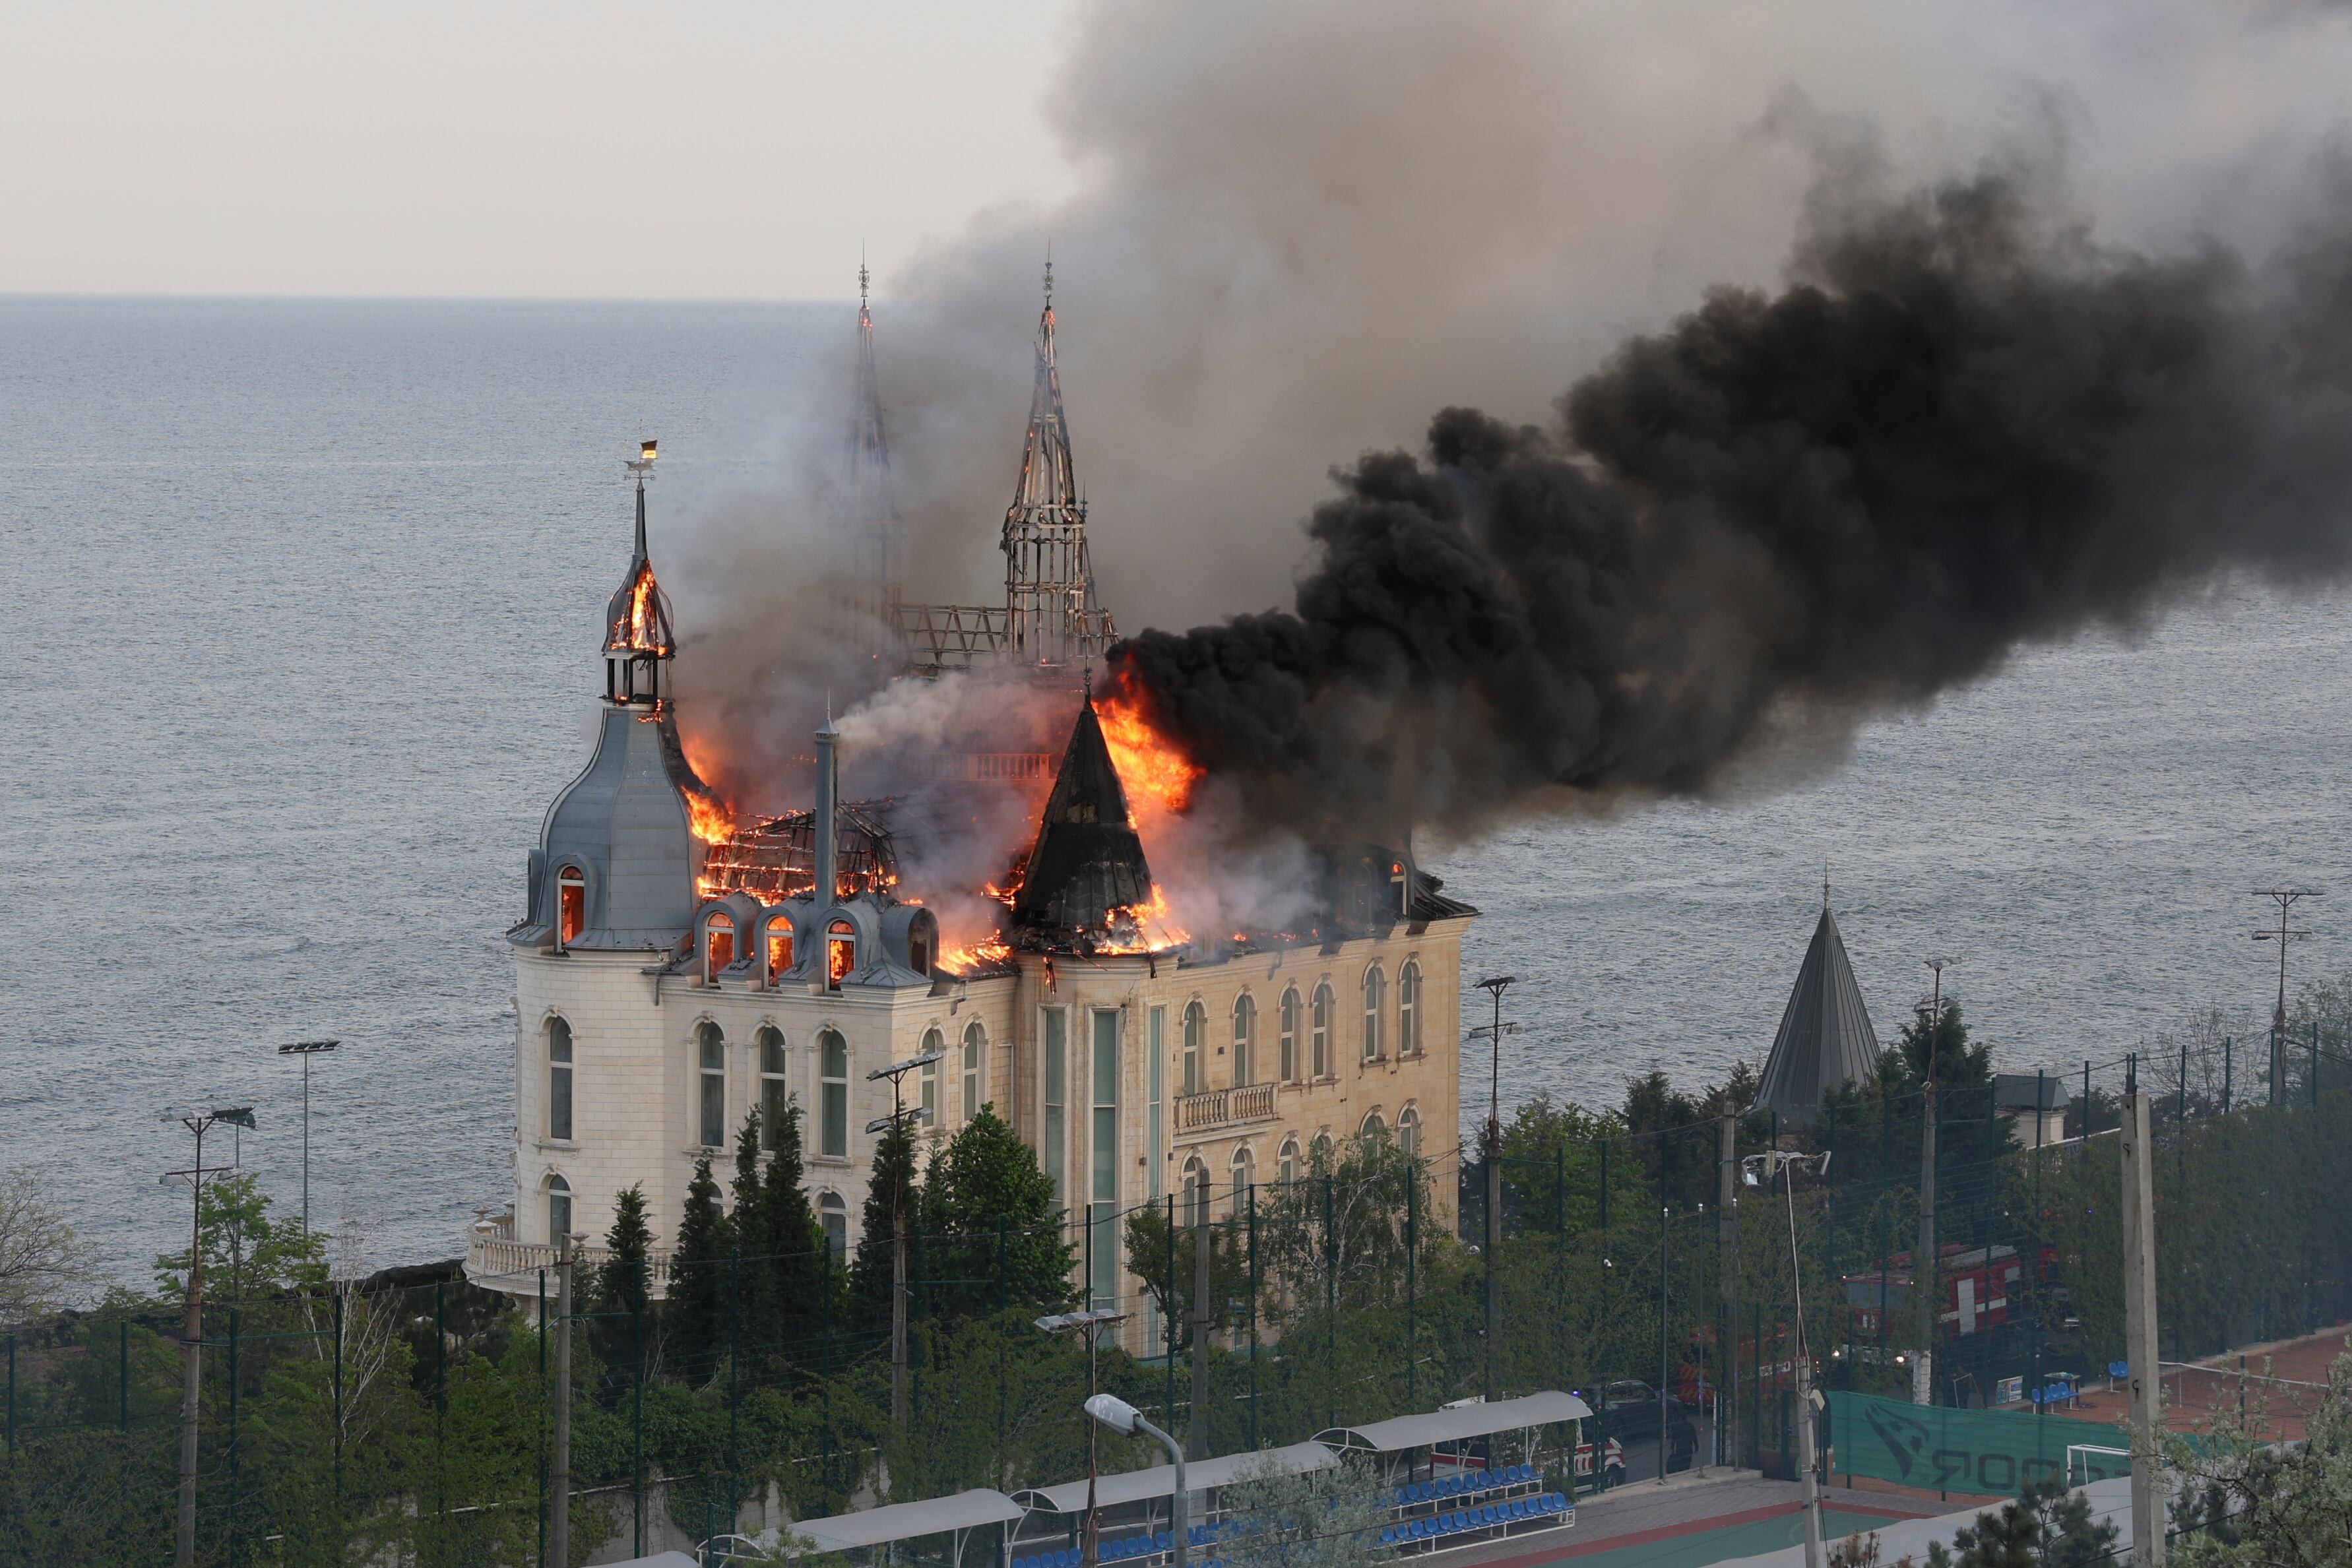 The building of the Odesa Law Academy, on fire after a Russian missile attack, April 29.